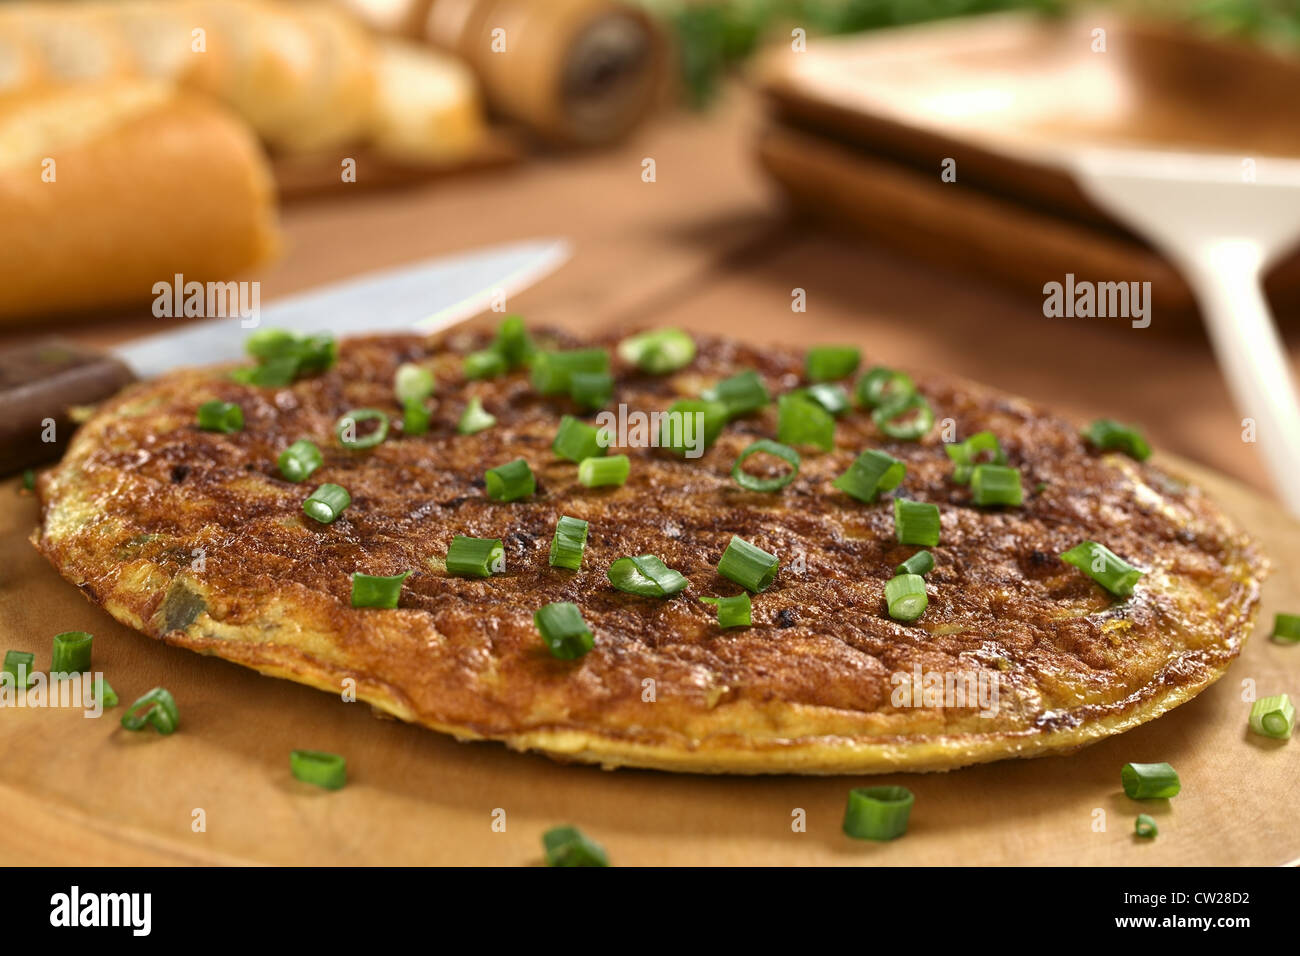 Fresh homemade Spanish tortilla (omelette with potatoes) with green onion on top and bread in the back Stock Photo